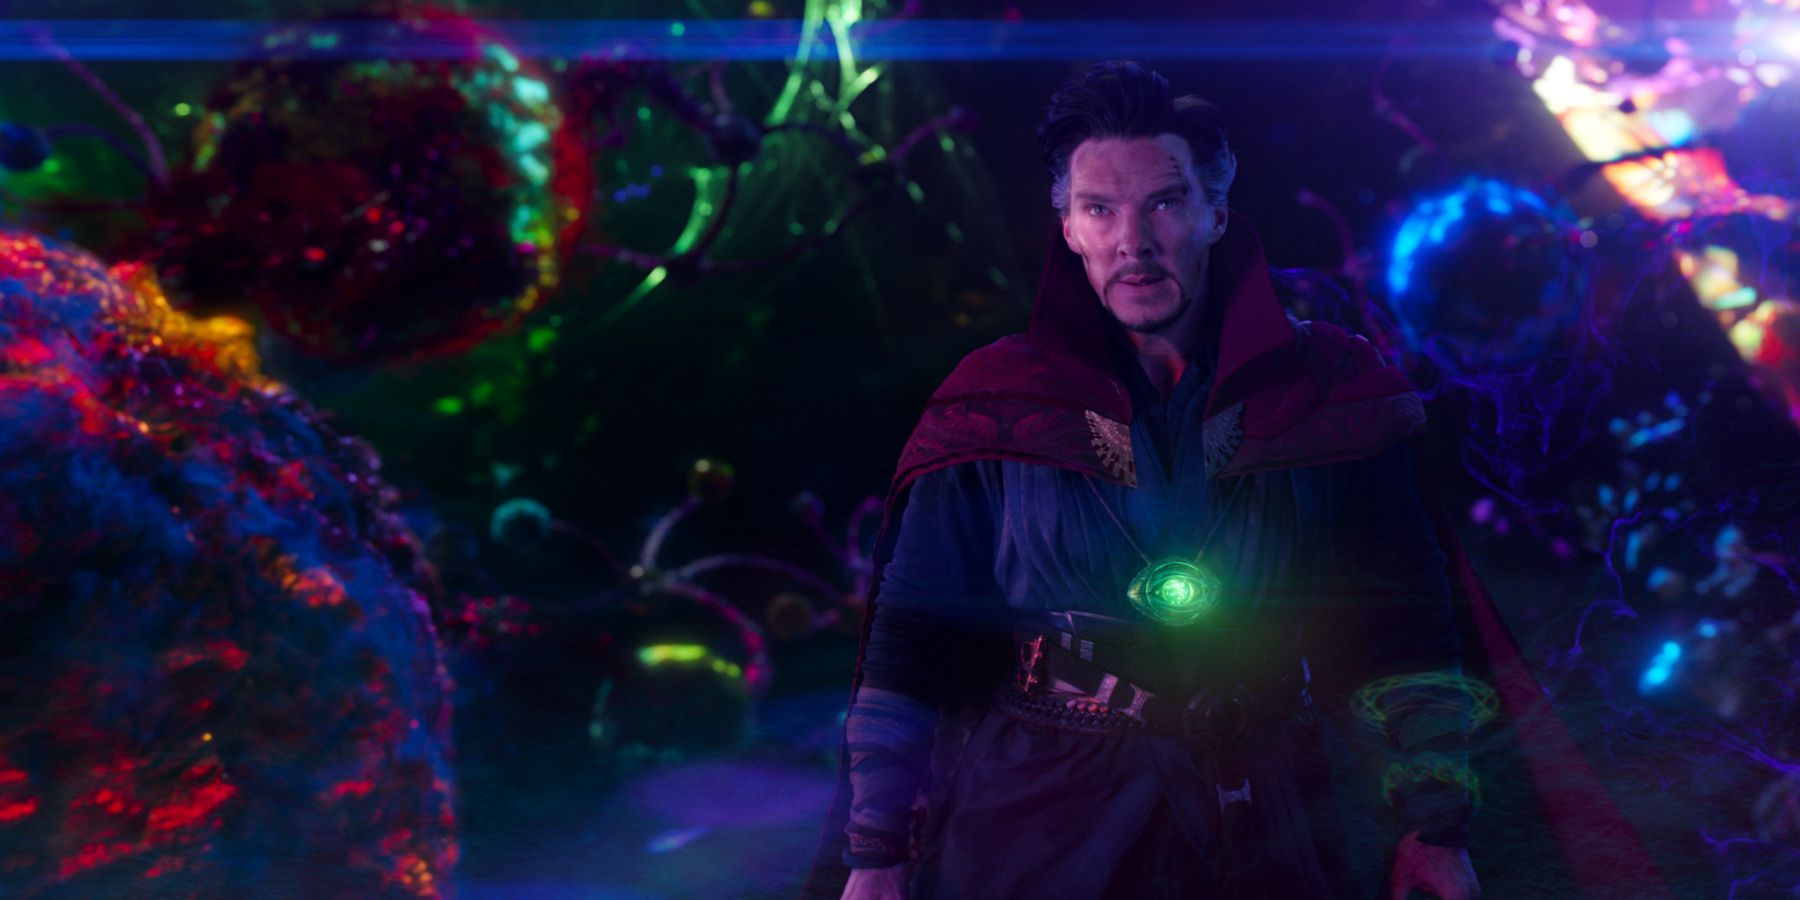 Doctor Strange faces off against Dormammu in his first solo movie